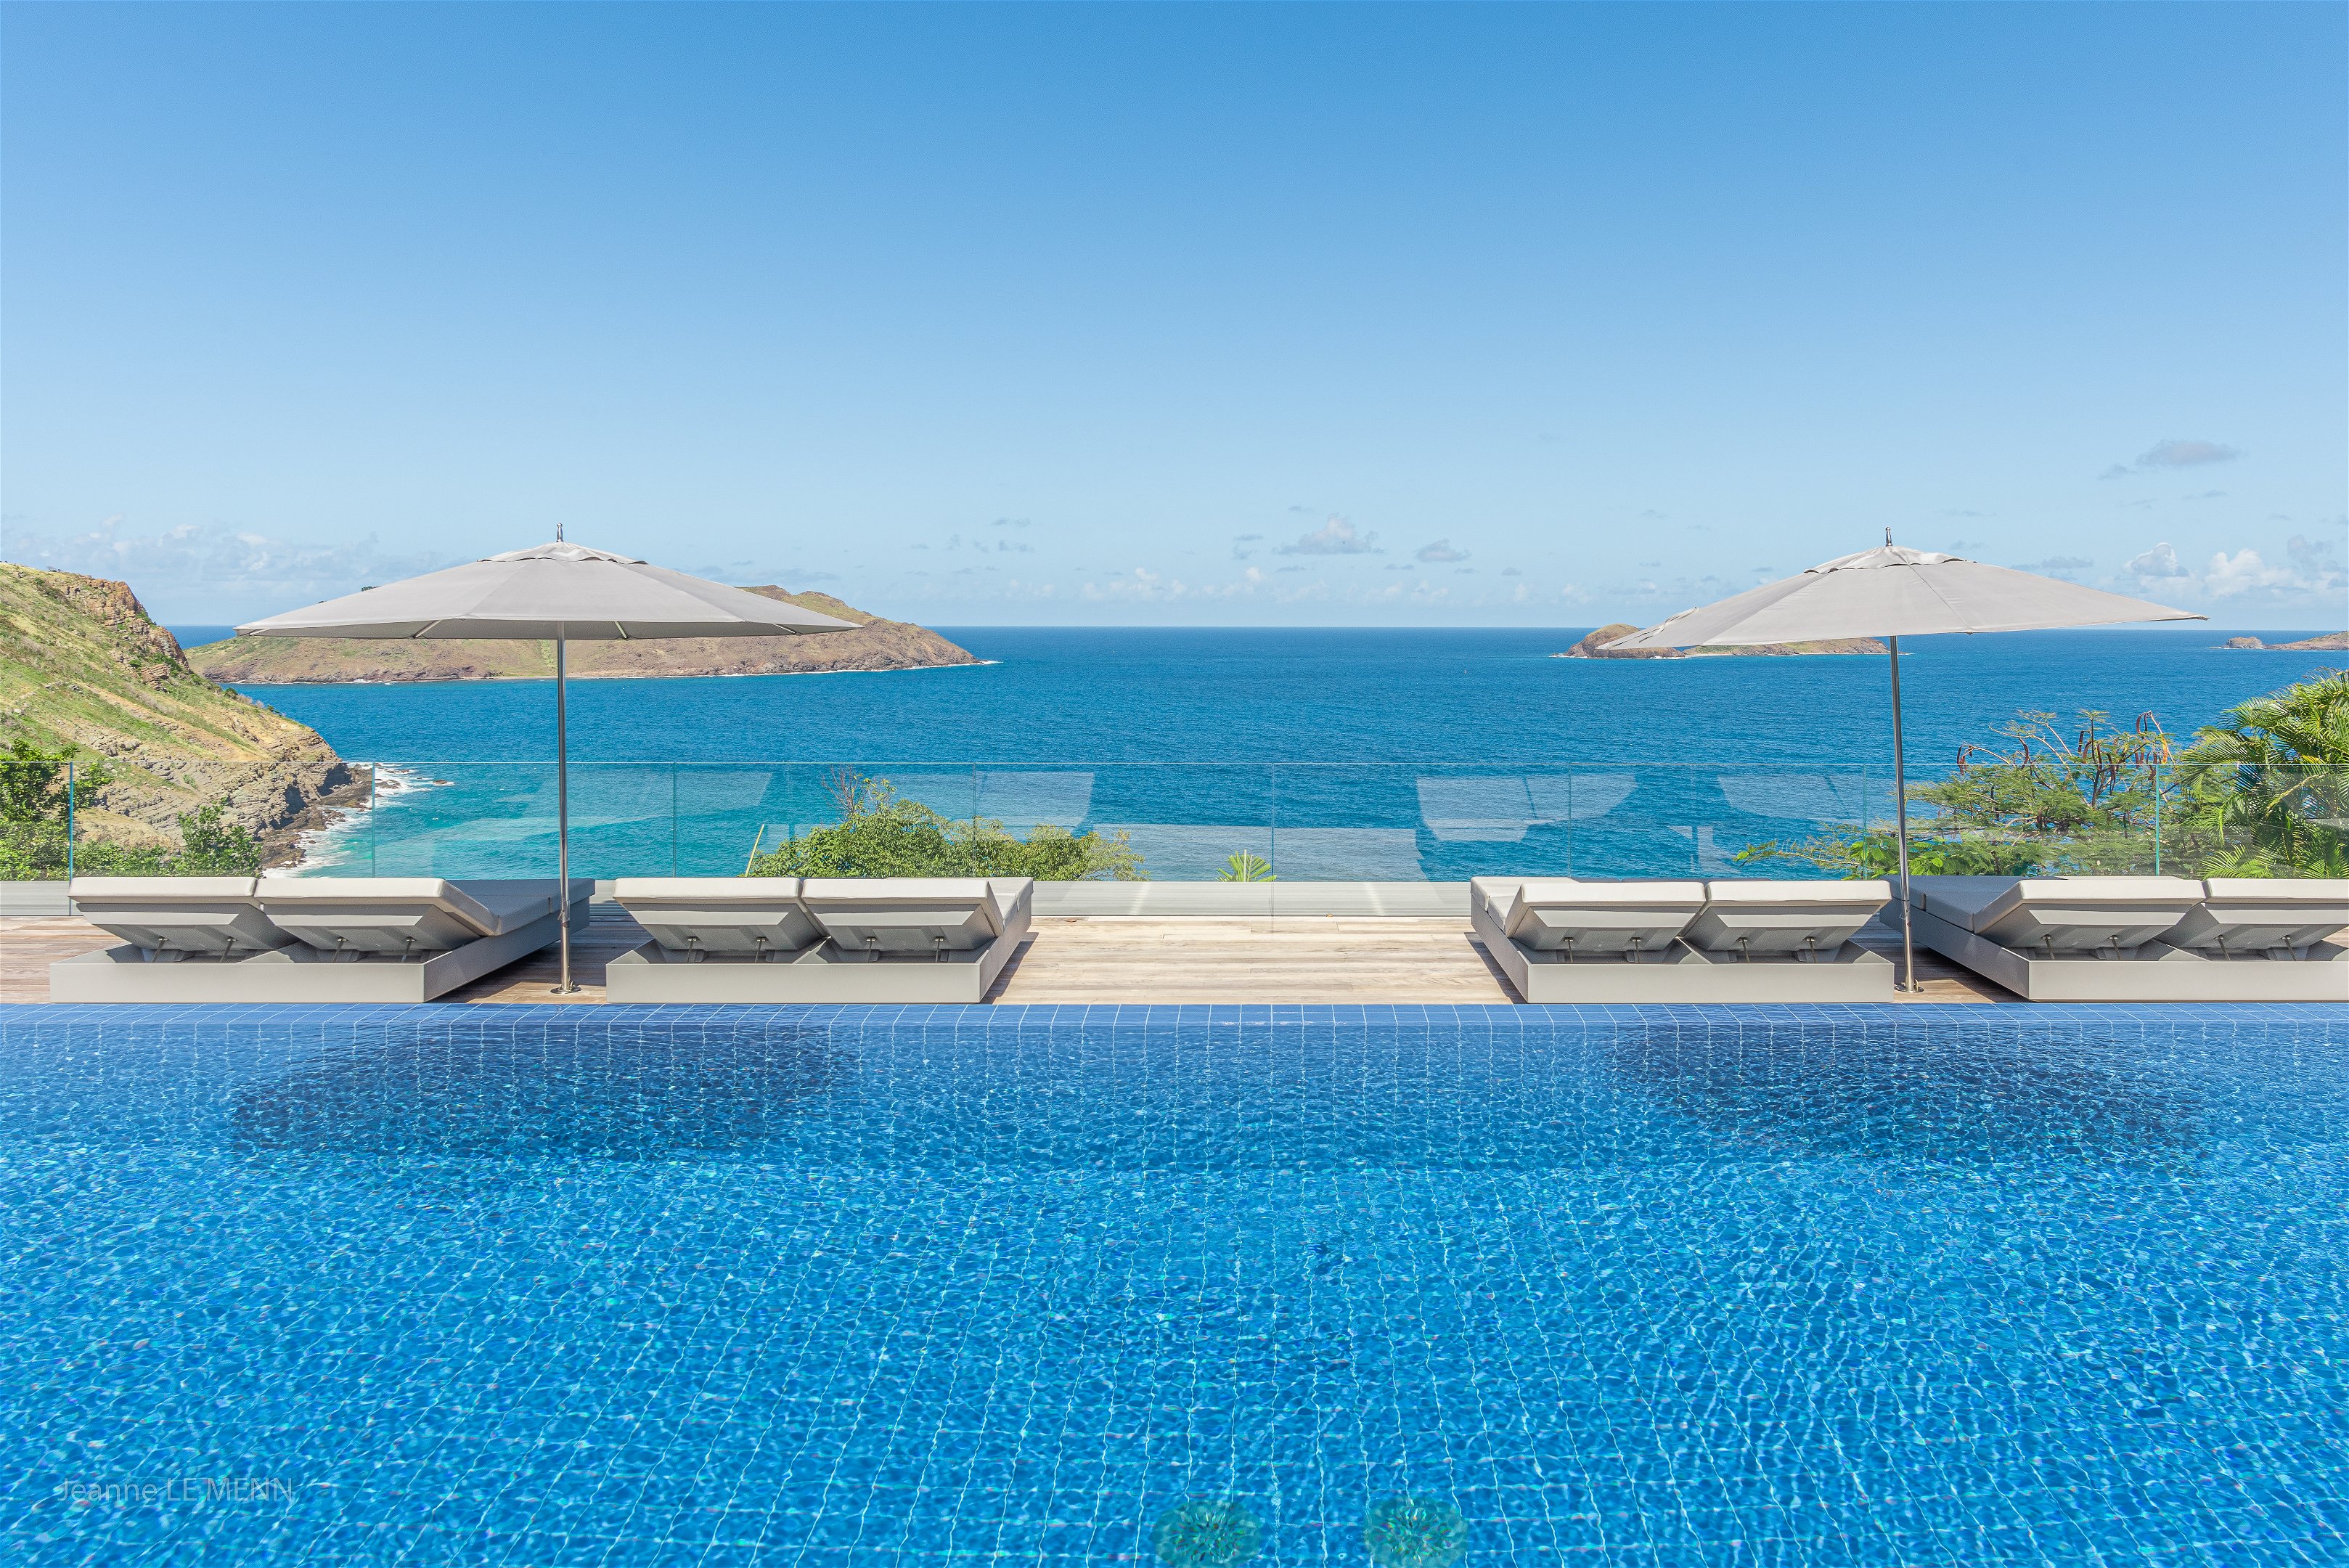 Large heated pool facing the view over the ocean. Expansive terrace, with deckchairs and lounge areas. Gas barbecue. 